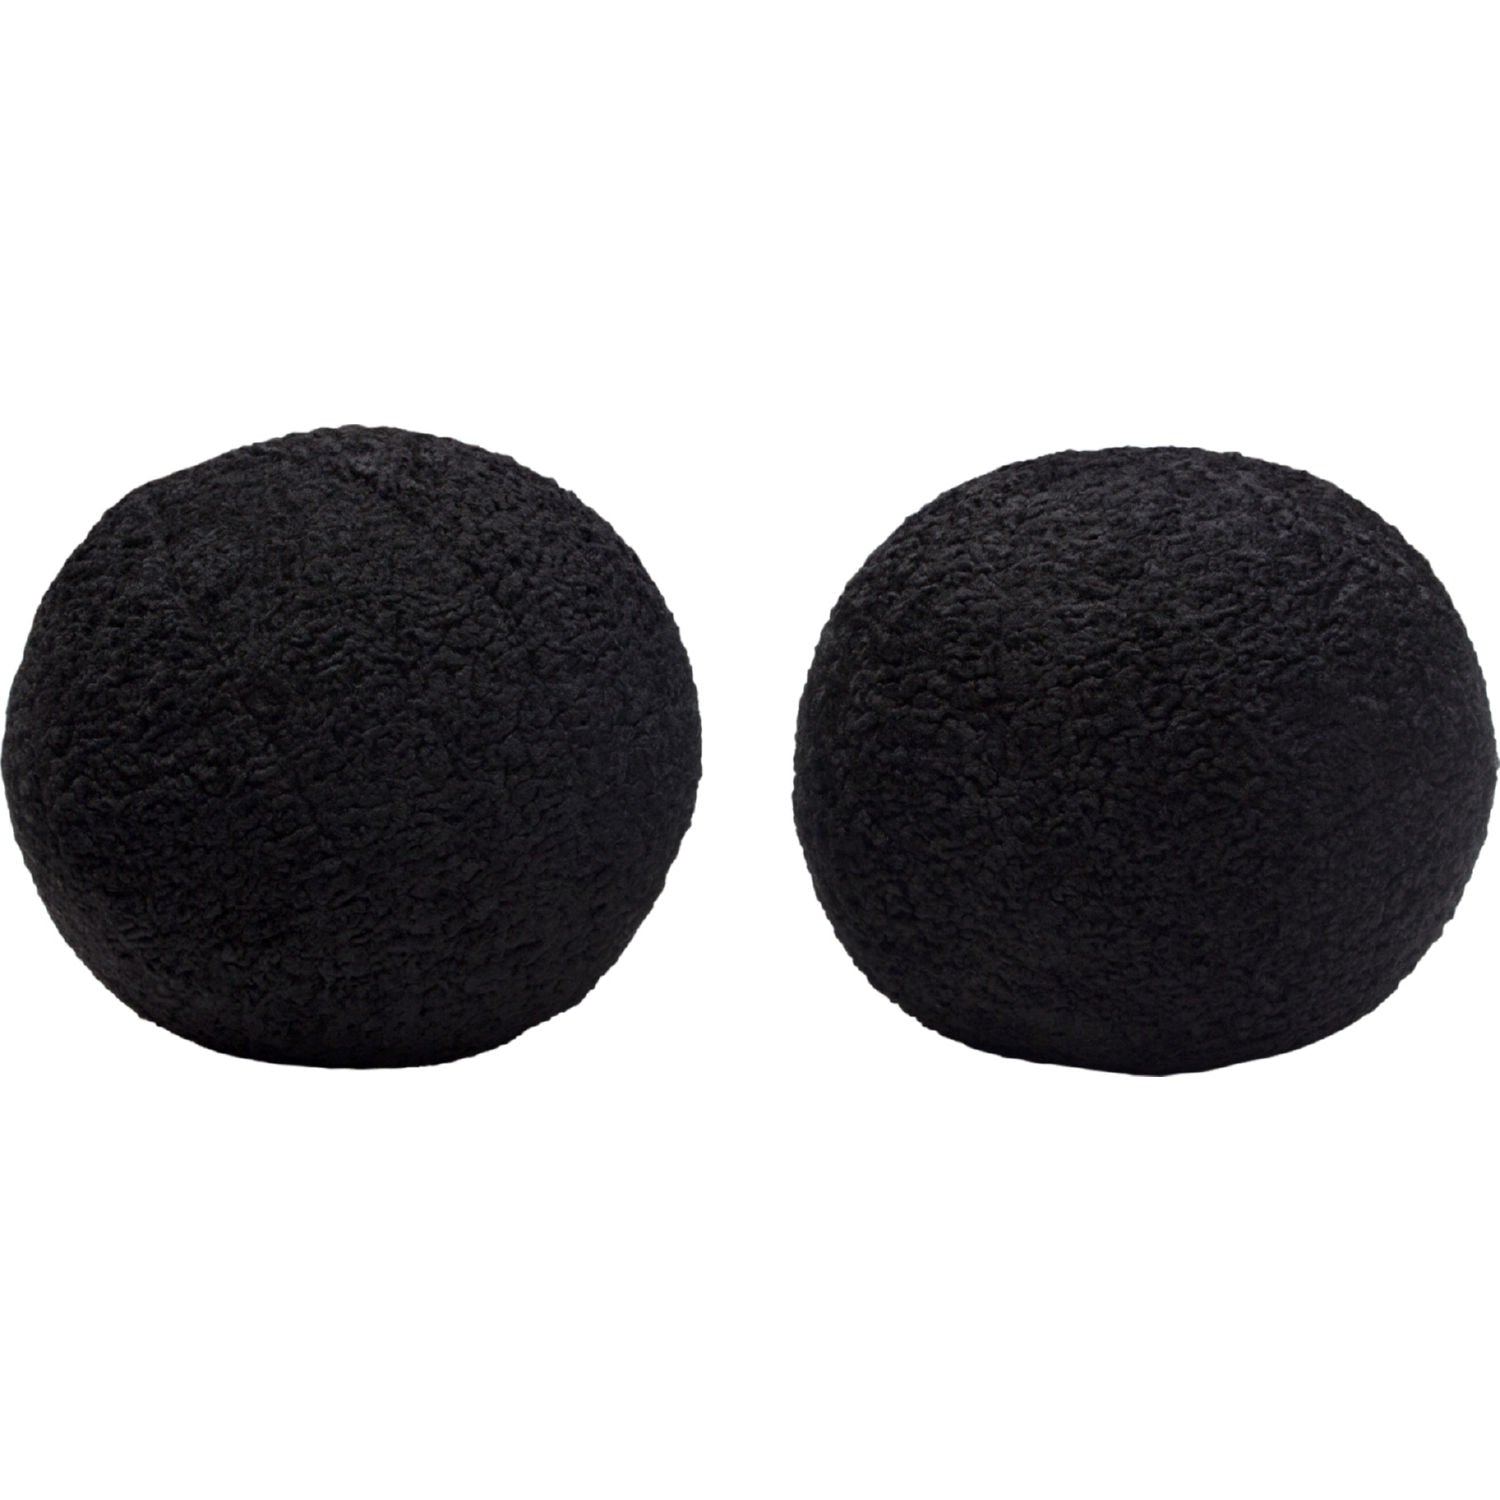 Sophisticated Round Accent Pillow - Set of 2